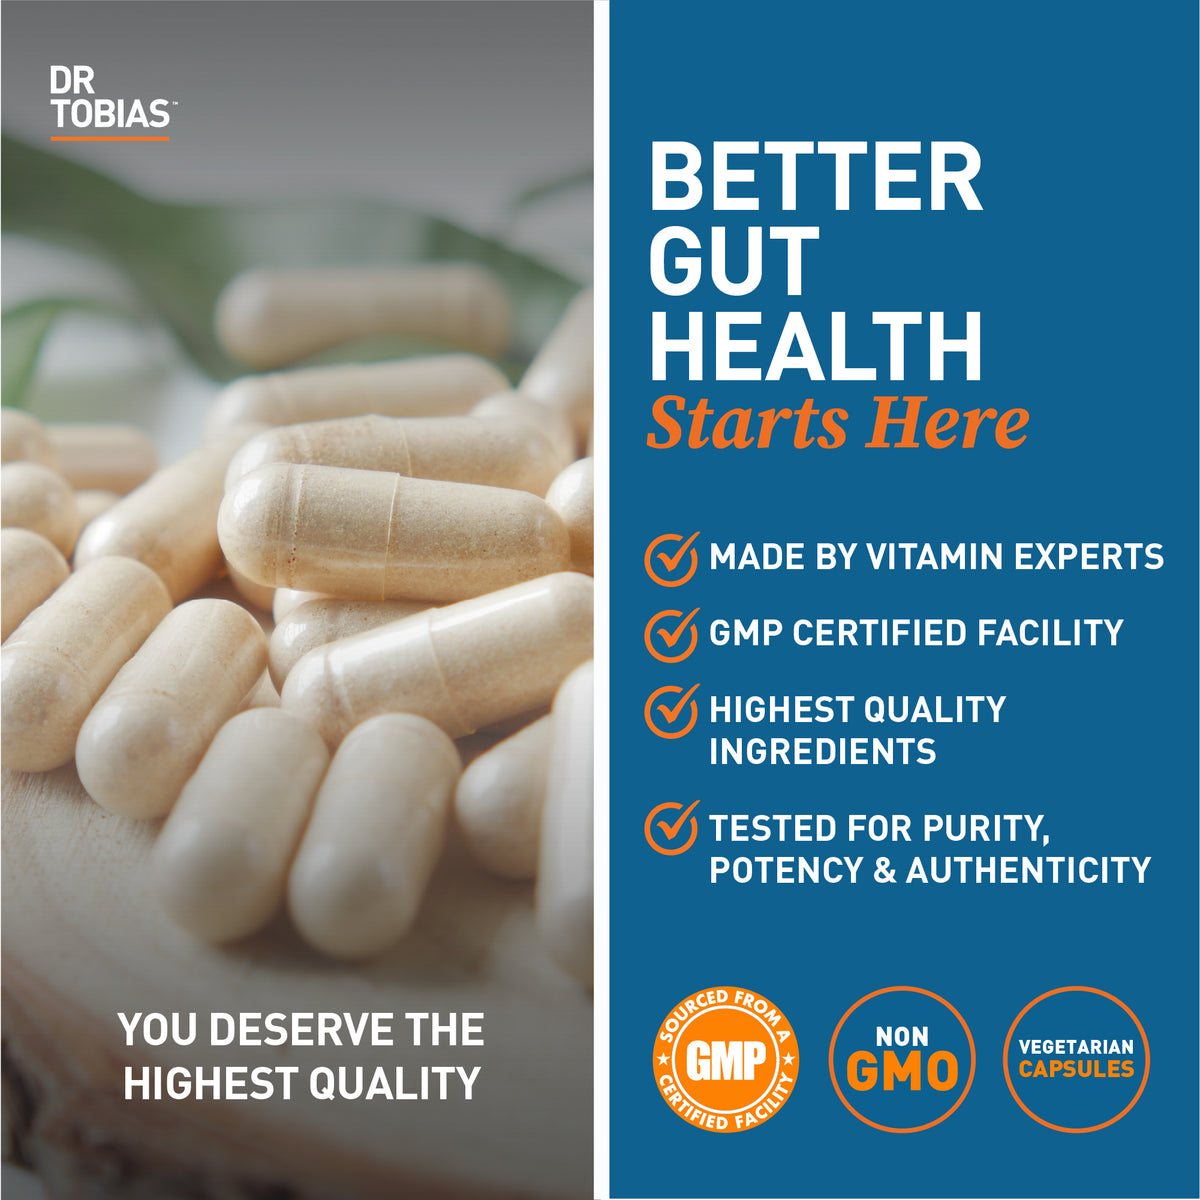 better gut health starts here. Made by vitamin experts, in a gmp certified faciity, with the highest ingredients and tested for purity, potency and authenticity. 